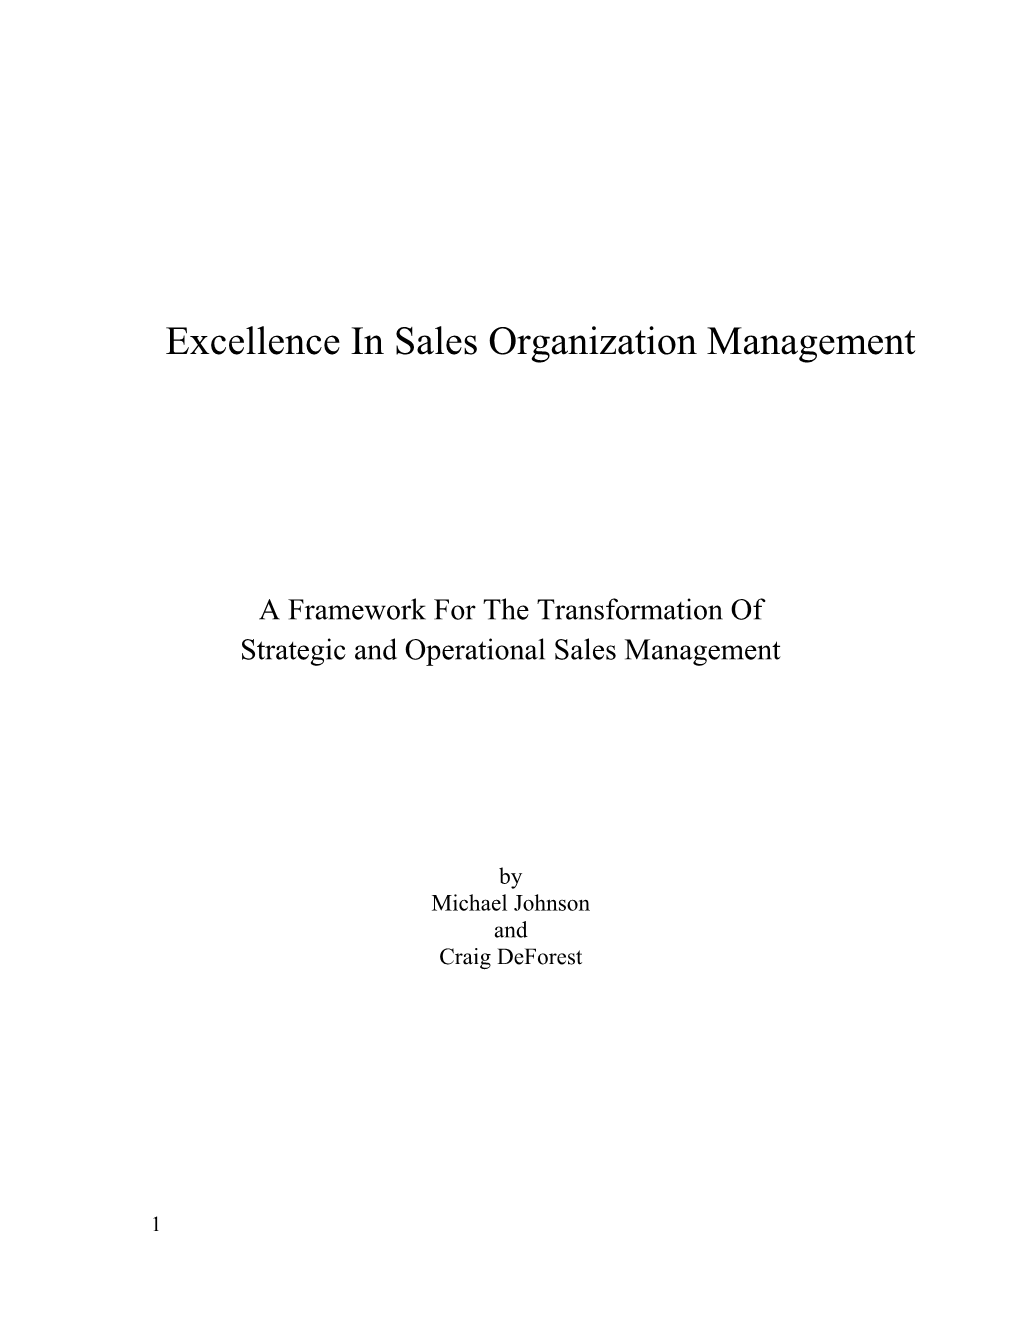 Excellence in Sales Organization Management